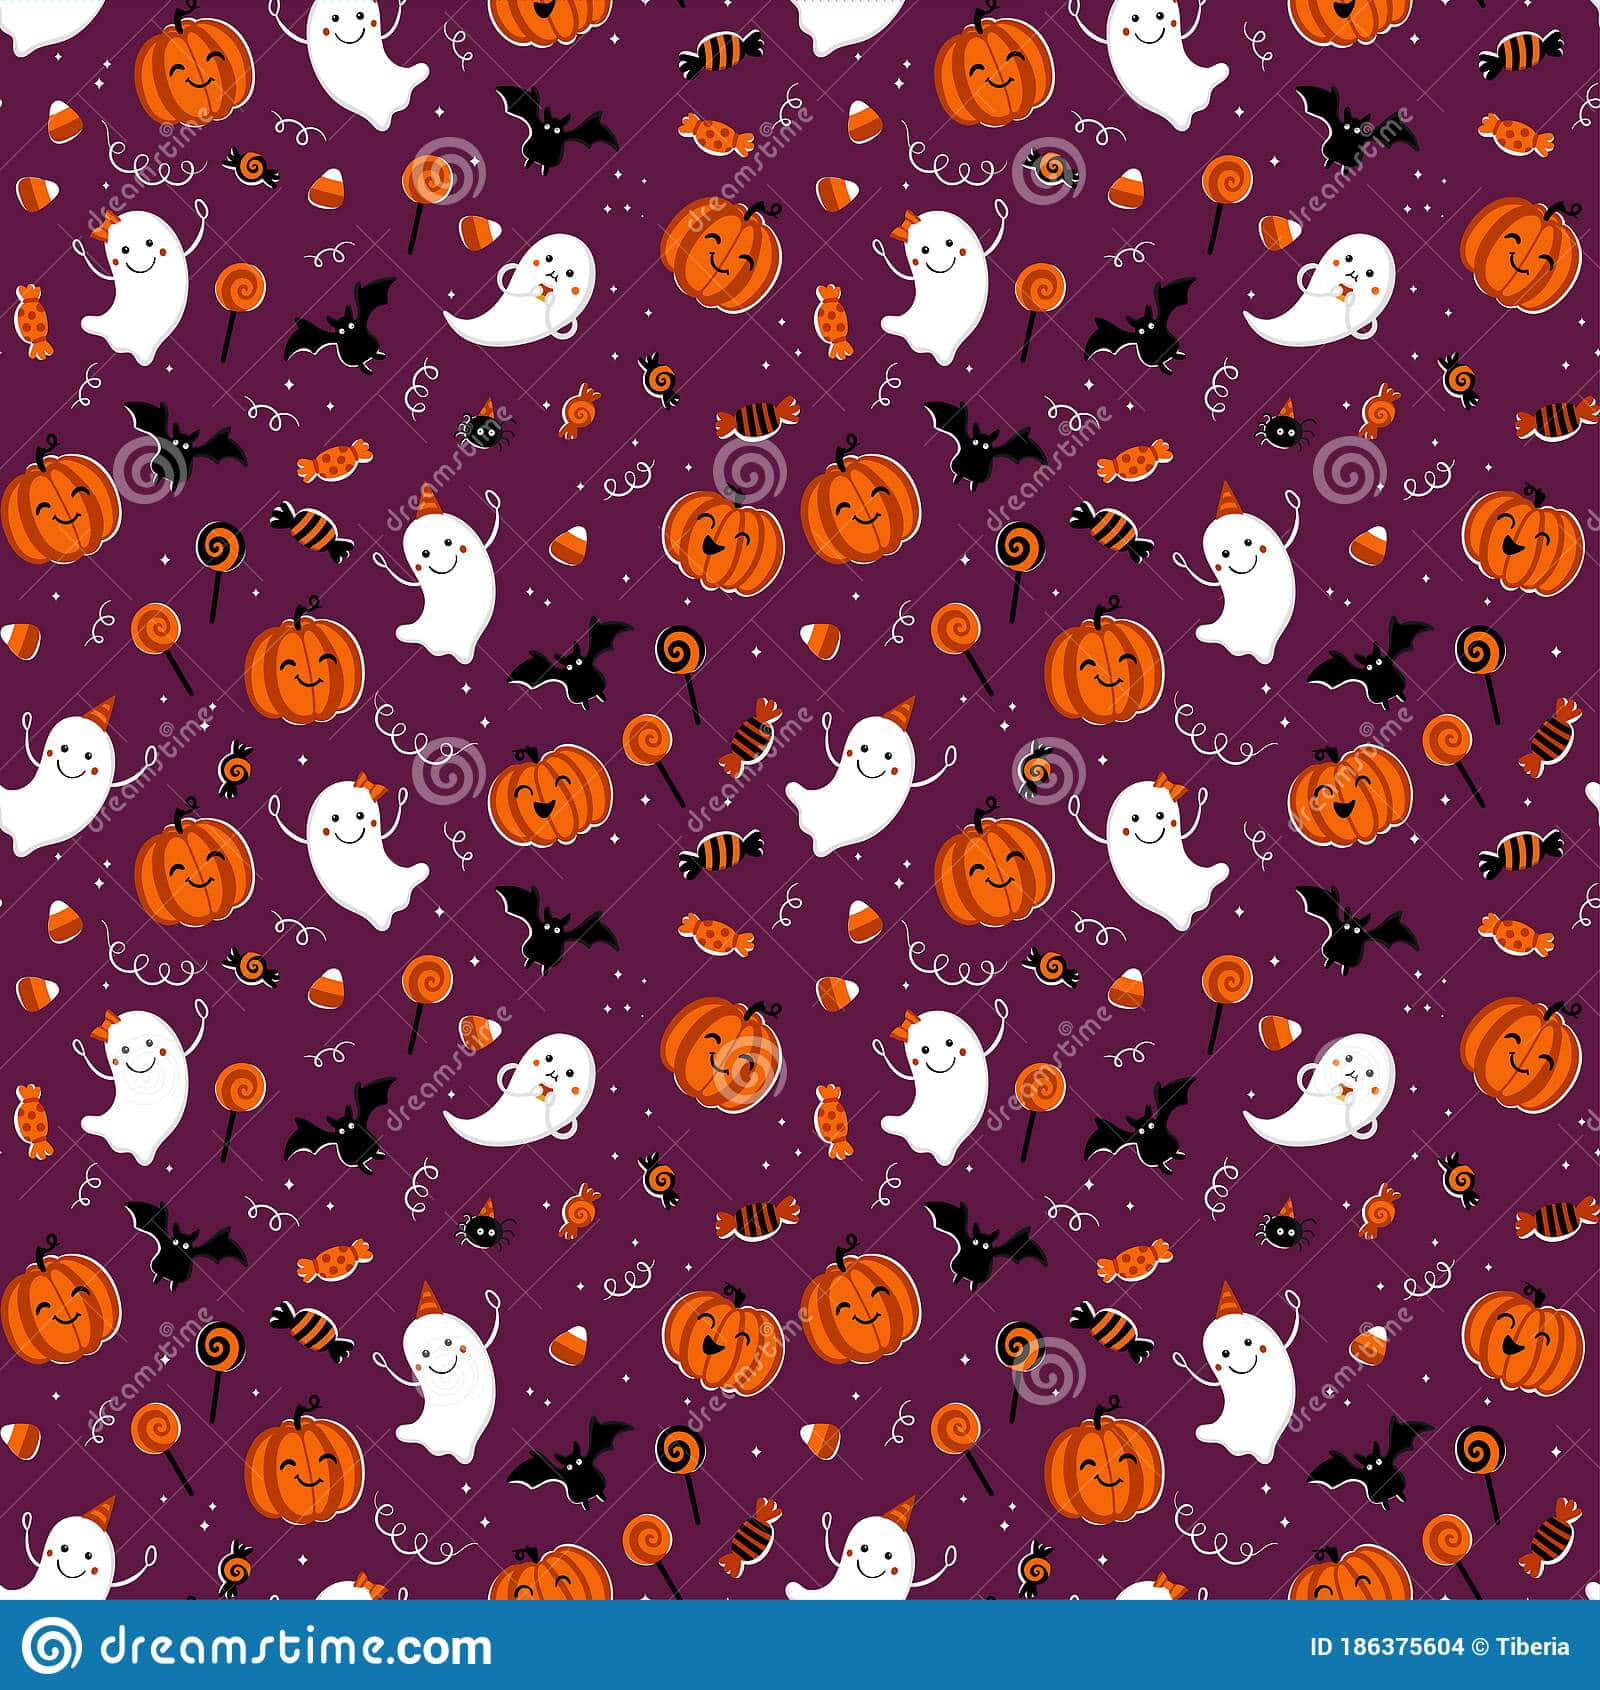 A Group Of Friends Having Fun On A Girly Halloween Night Wallpaper